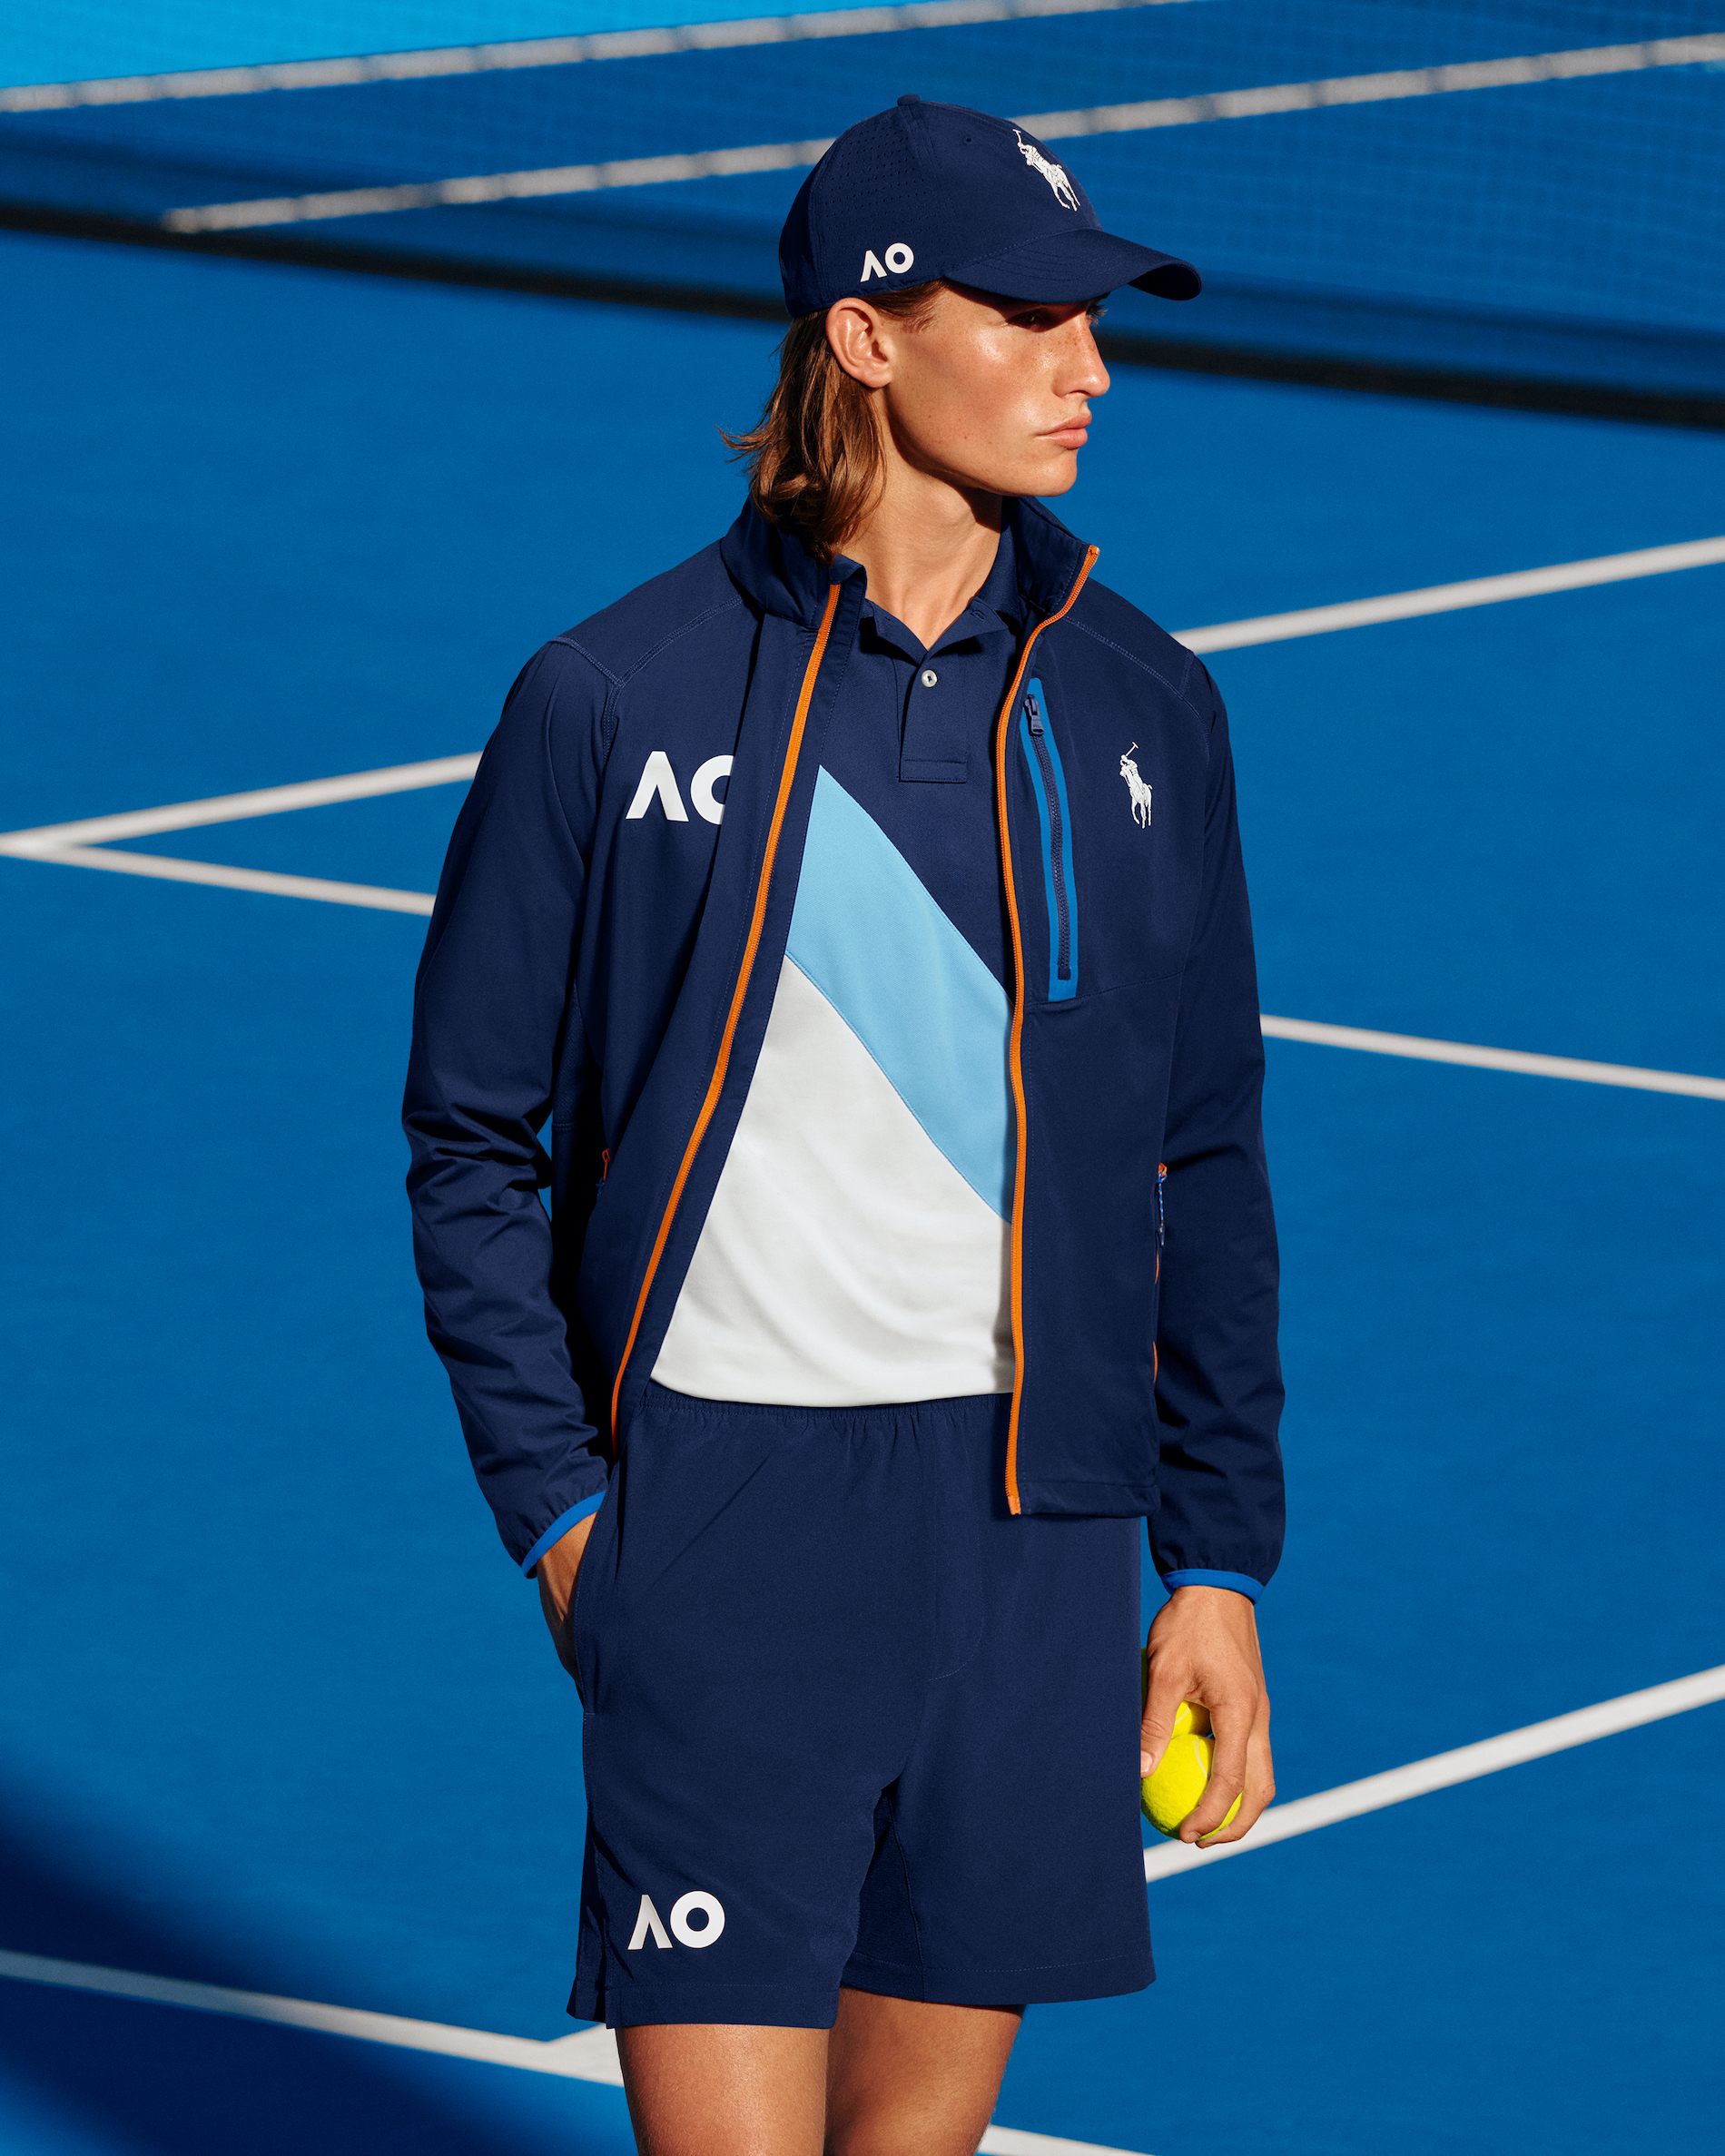 Ralph Lauren on X: To mark our 16 year partnership as the Official  Outfitter of The Championships, Wimbledon, we celebrate the spirit of  sportsmanship through an immersive experience at @Selfridges Stop by